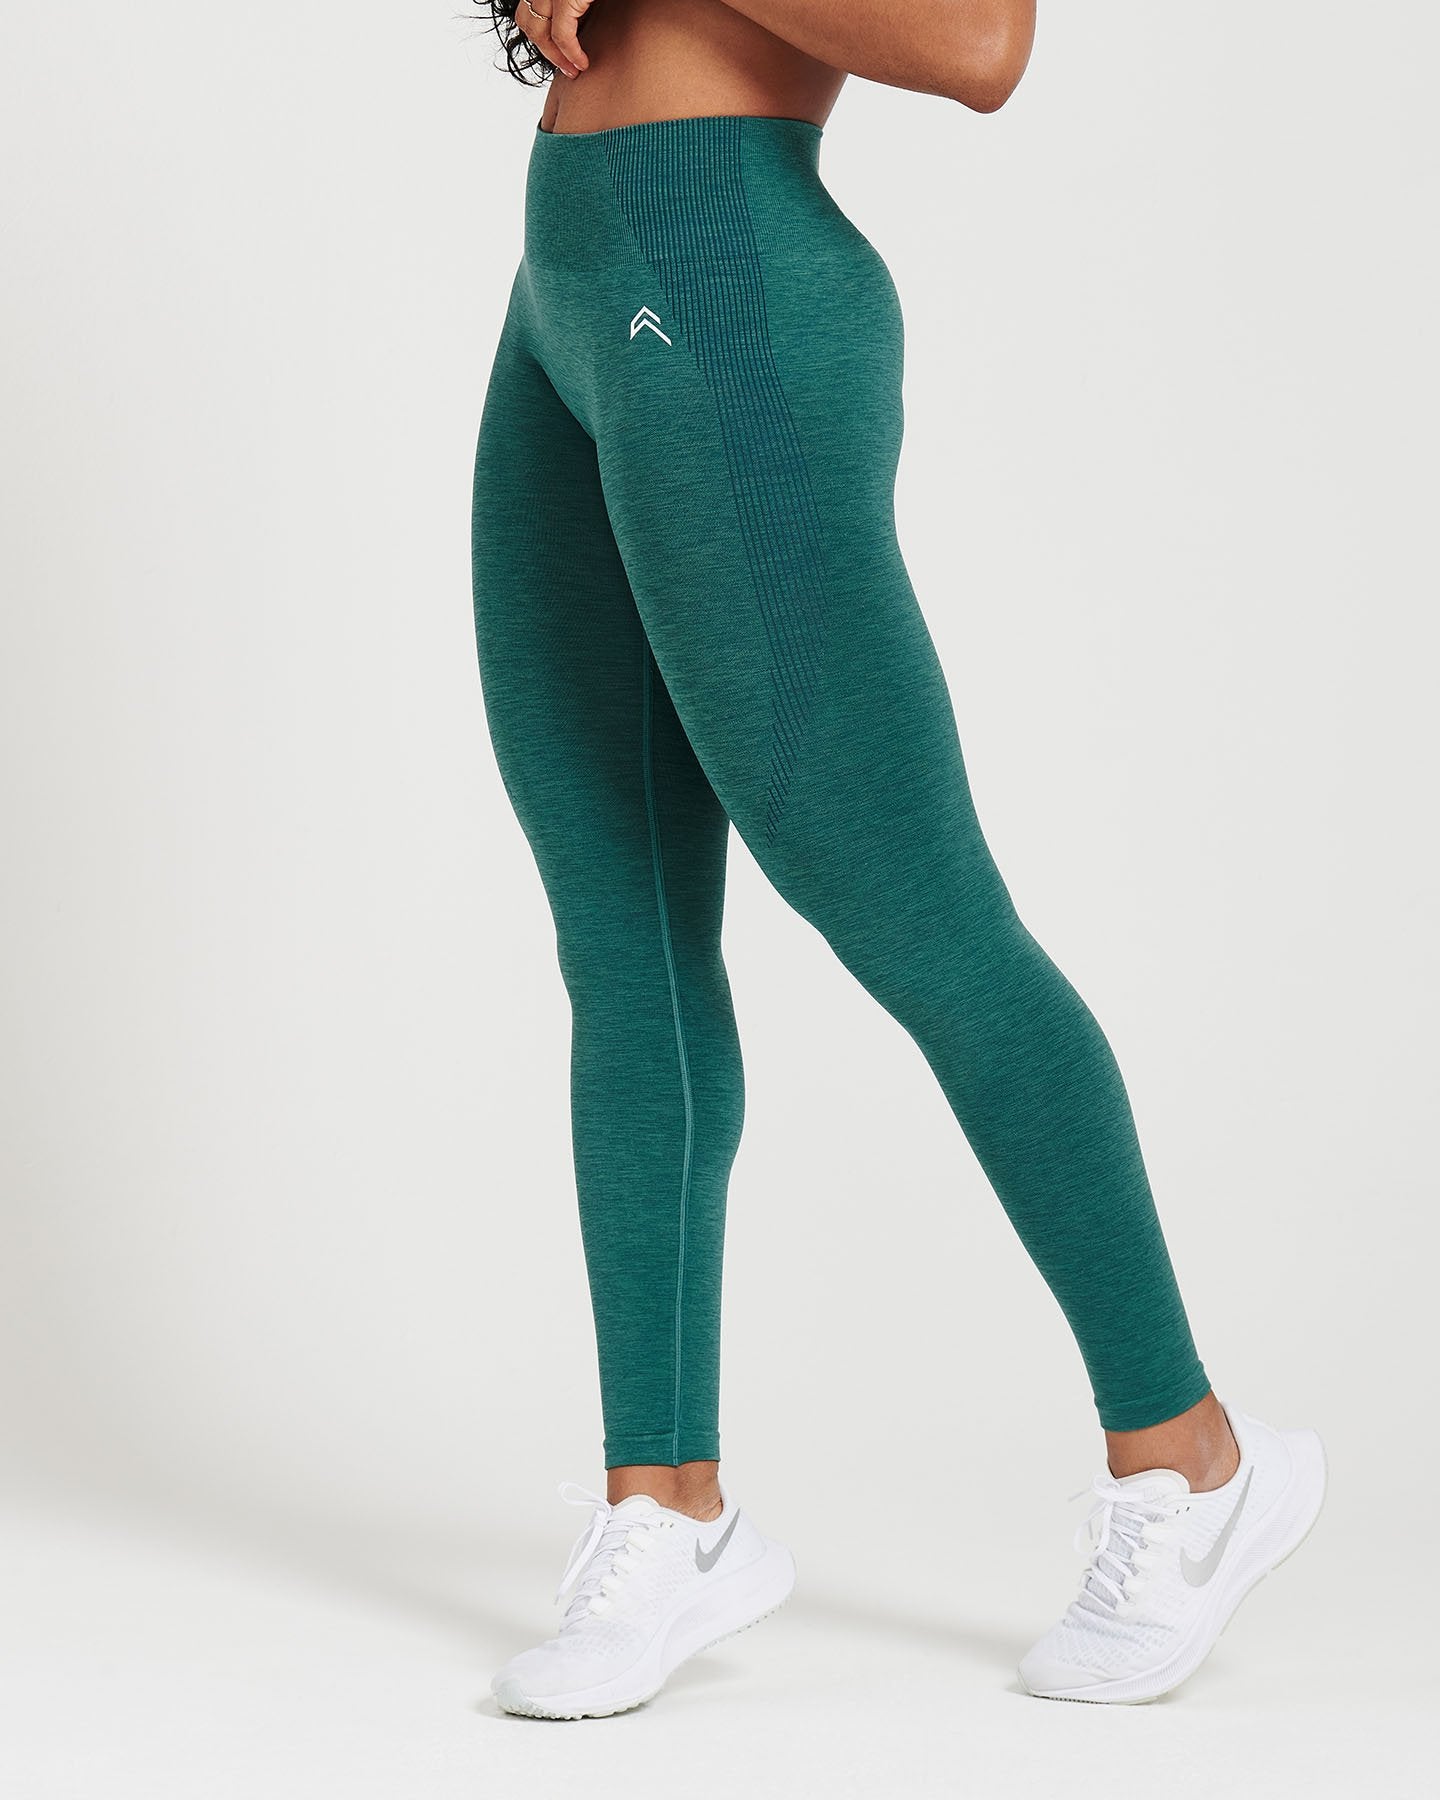 ACTIVEWEAR WOMENS - EFFORTLESS COLLECTION